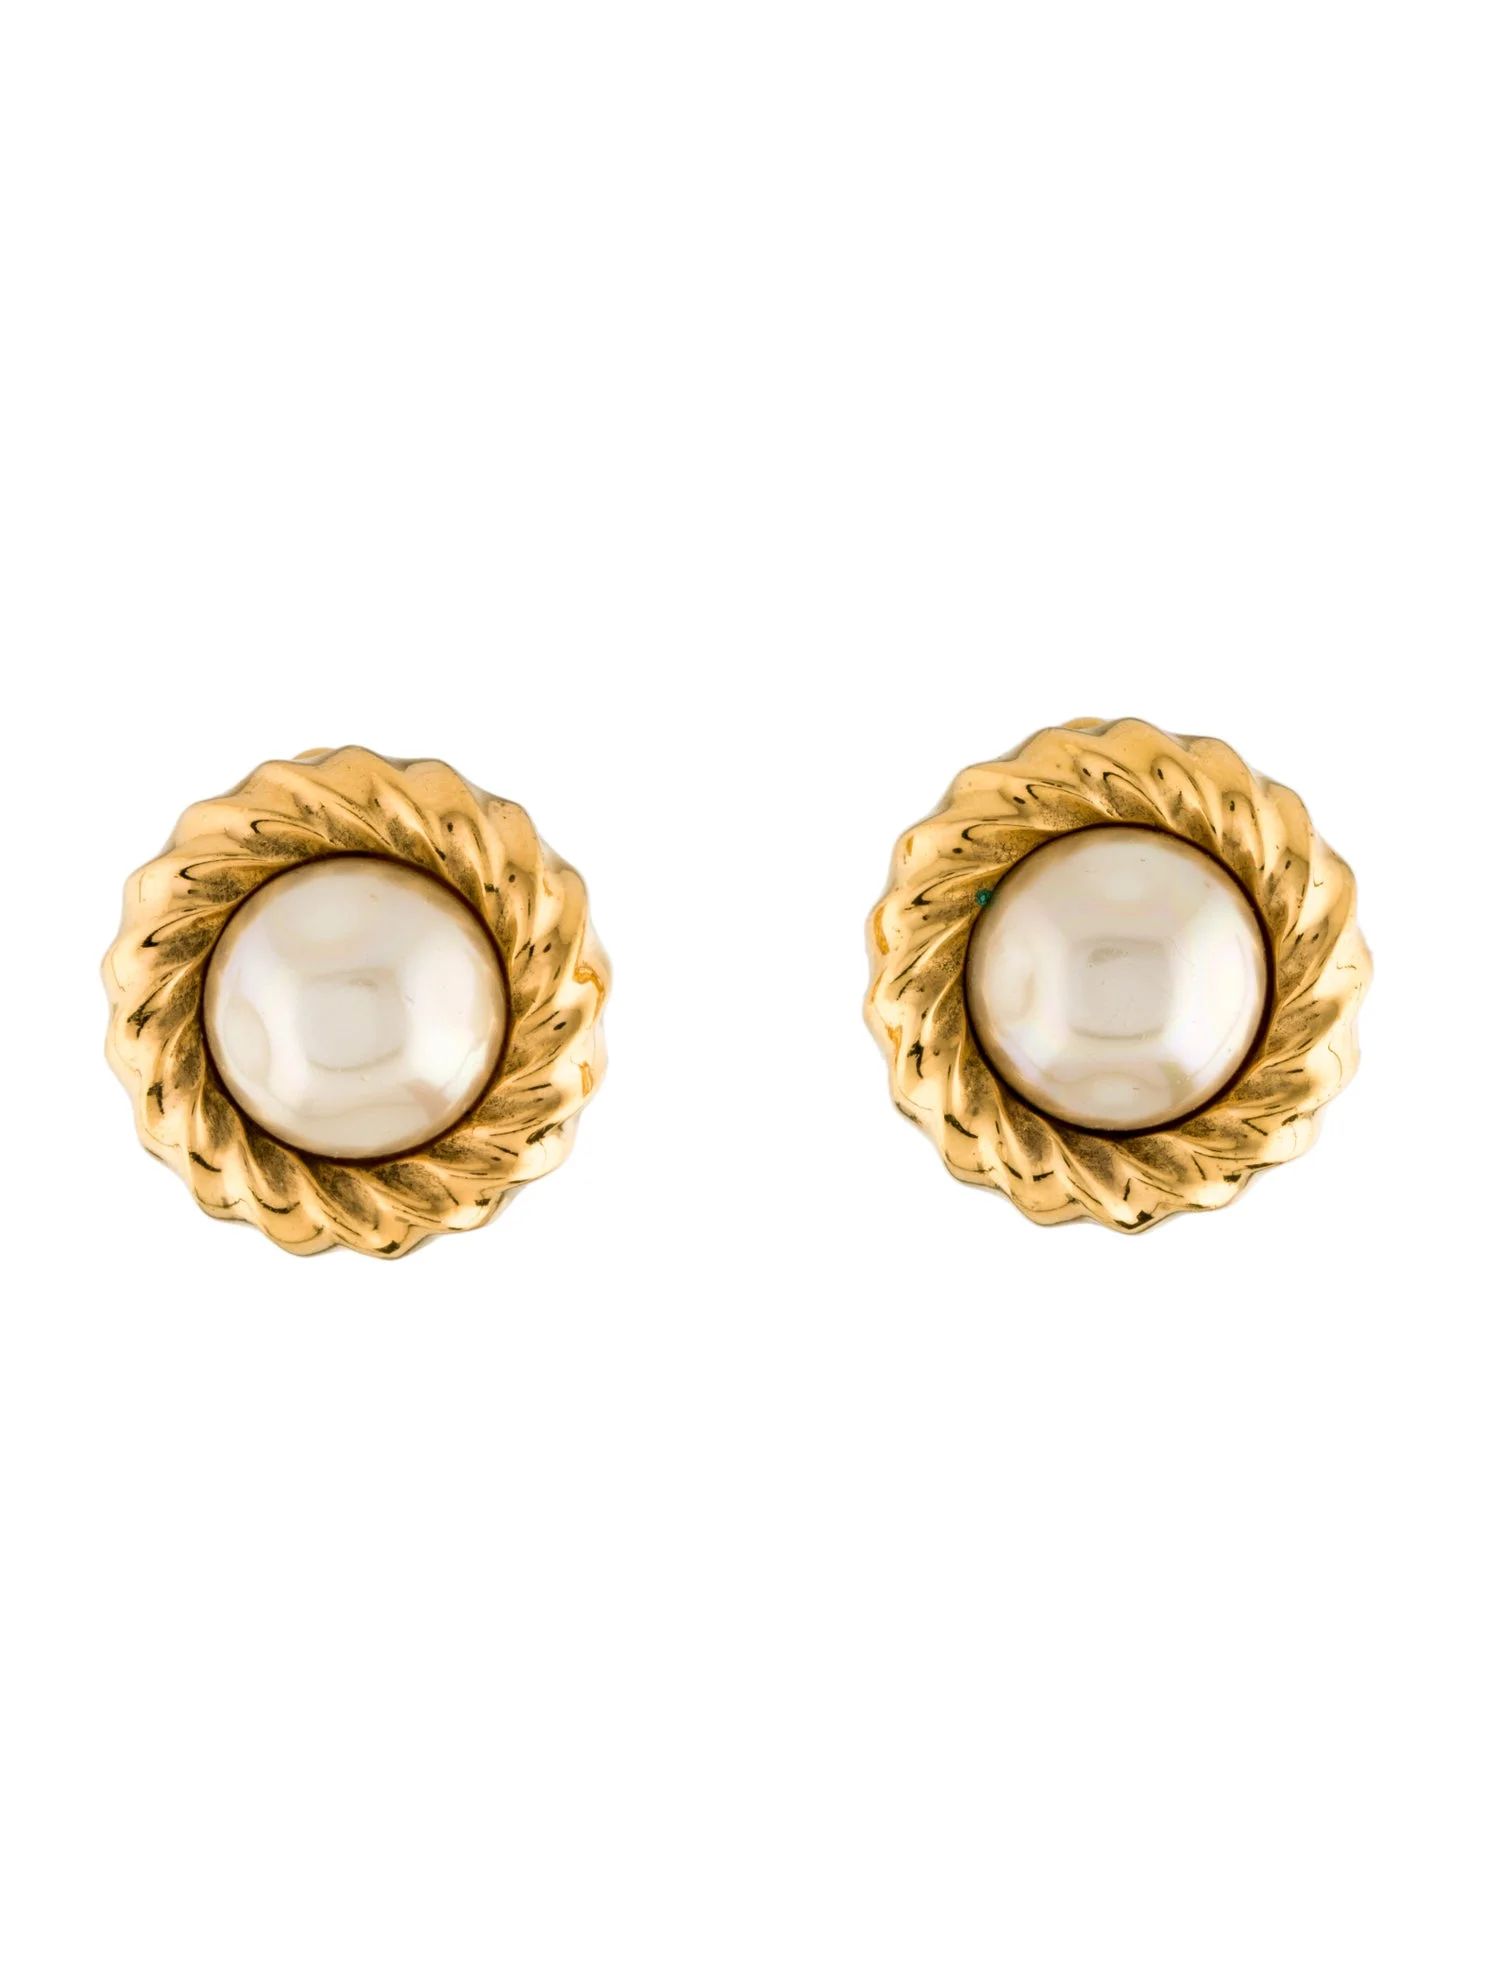 Vintage Faux Pearl Clip-On Earrings | The RealReal